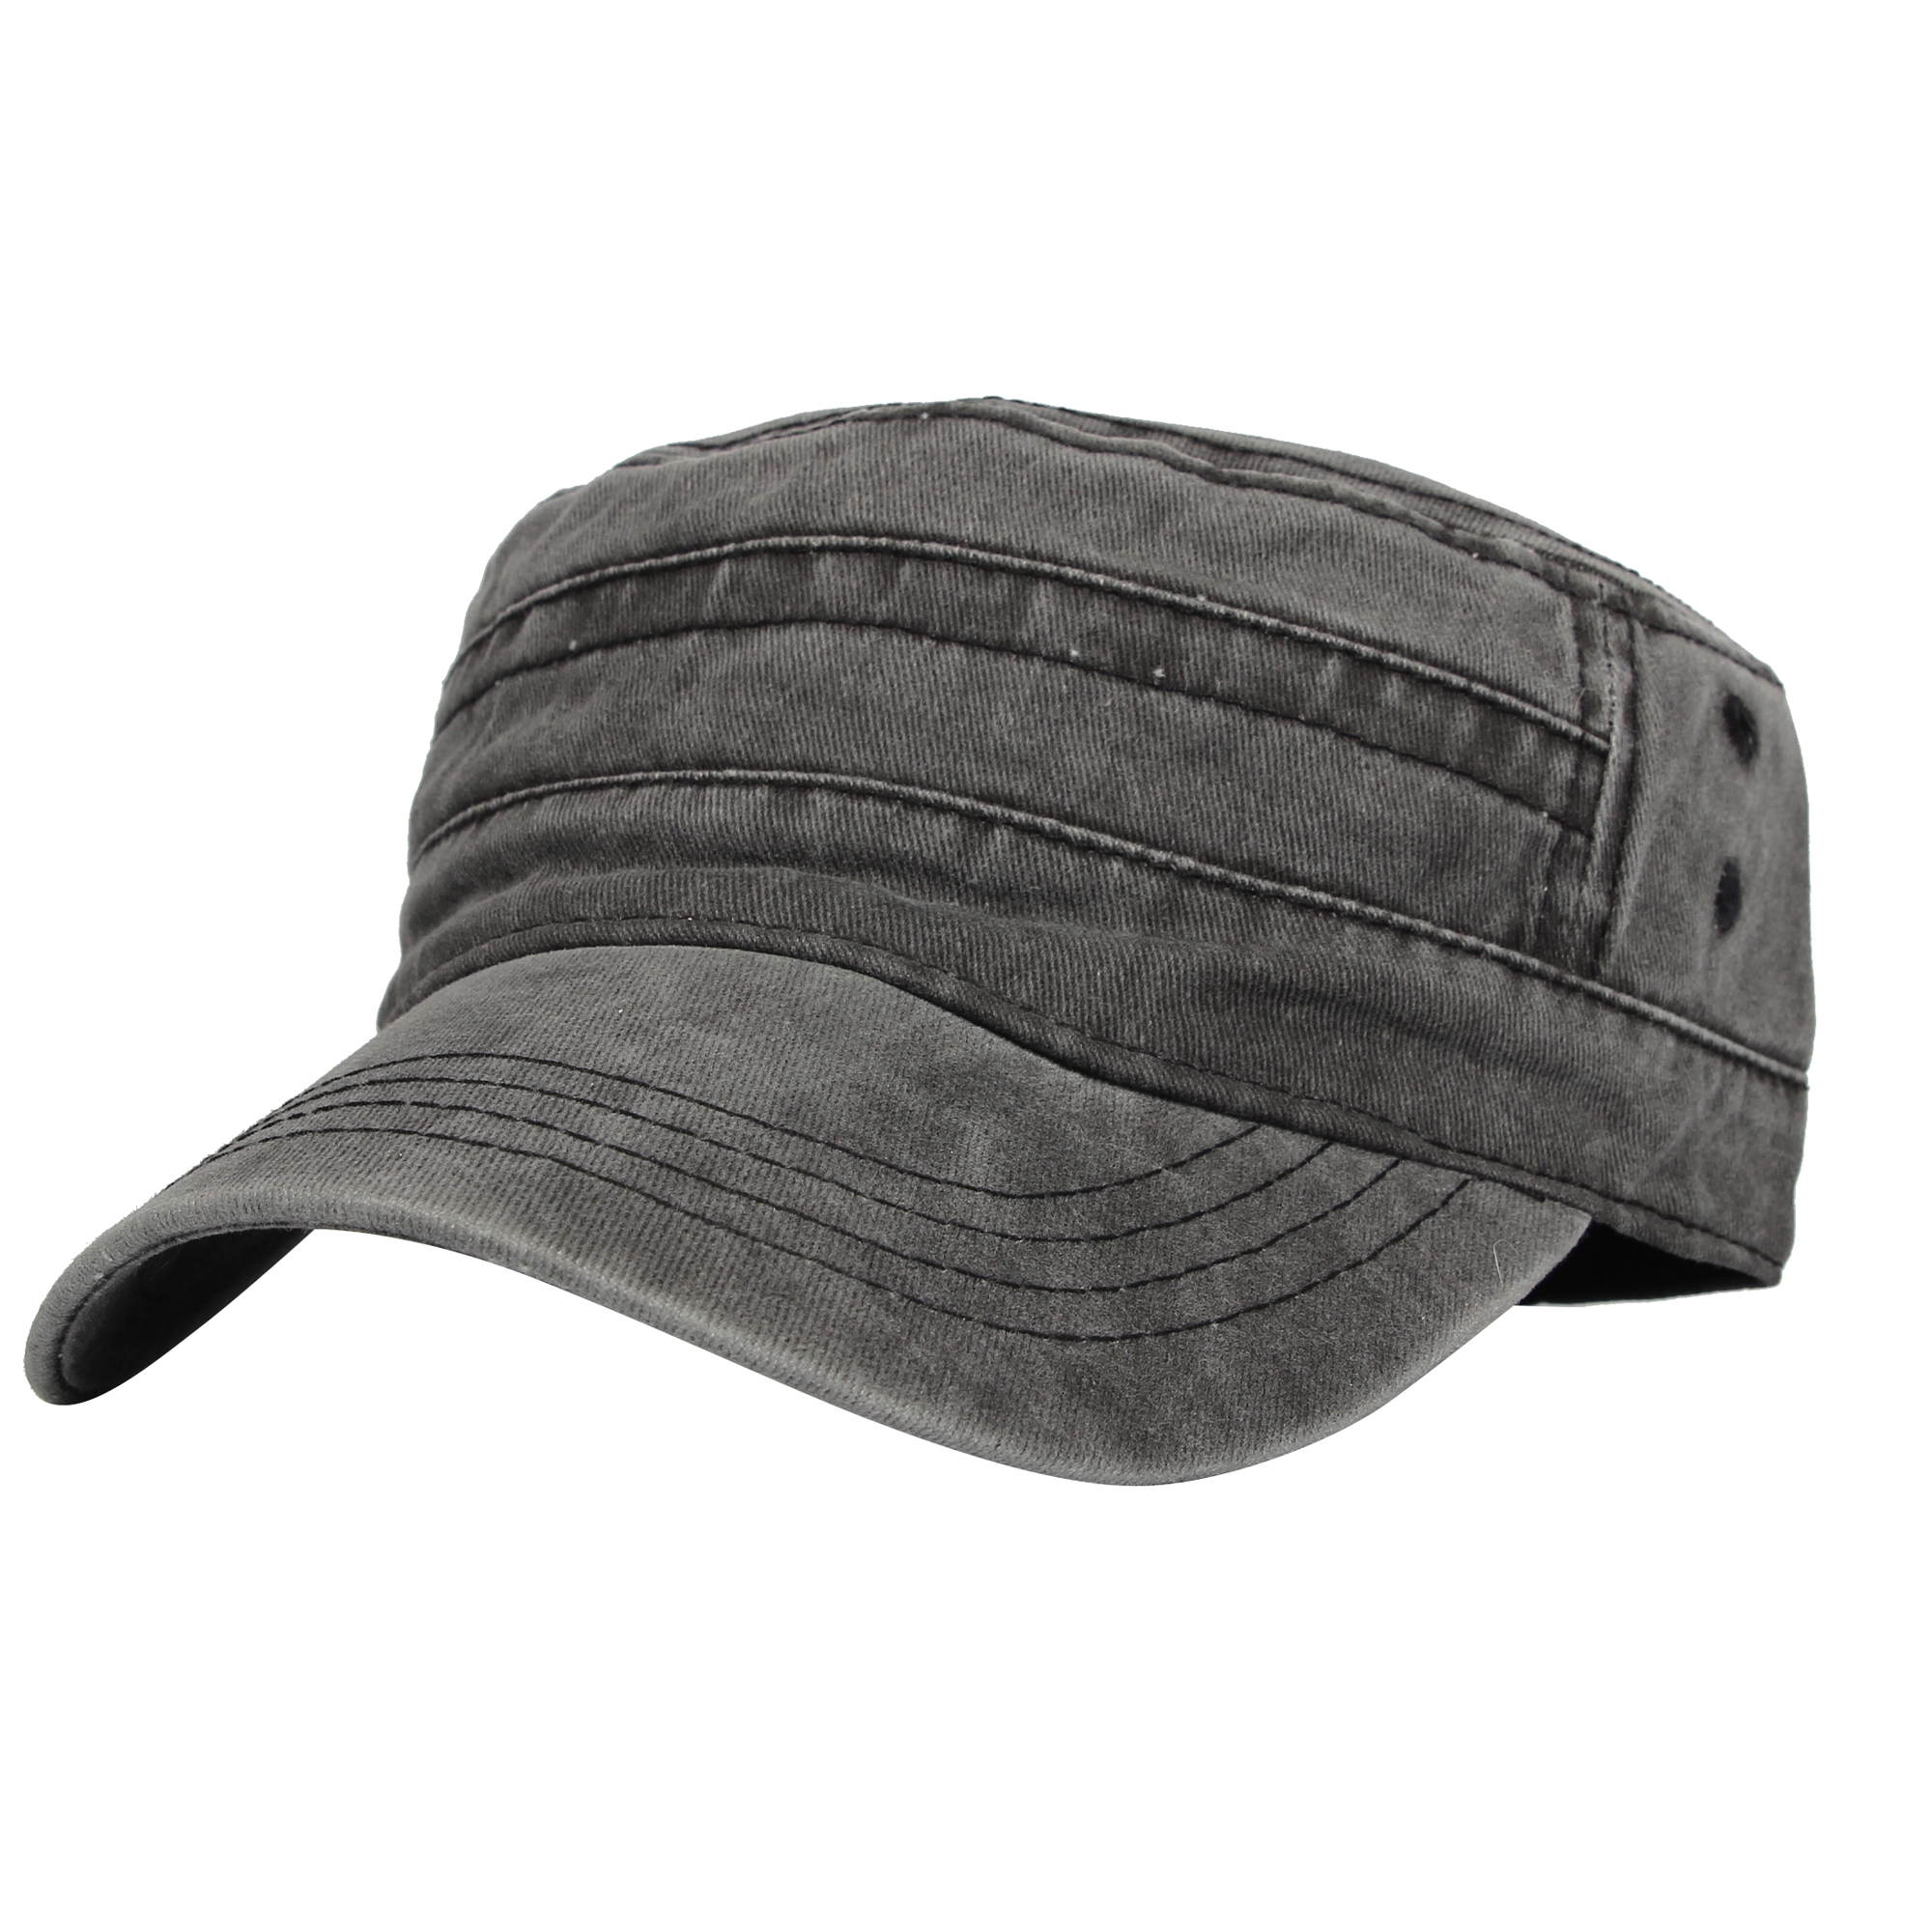 Army Cadet Hat - Army Military